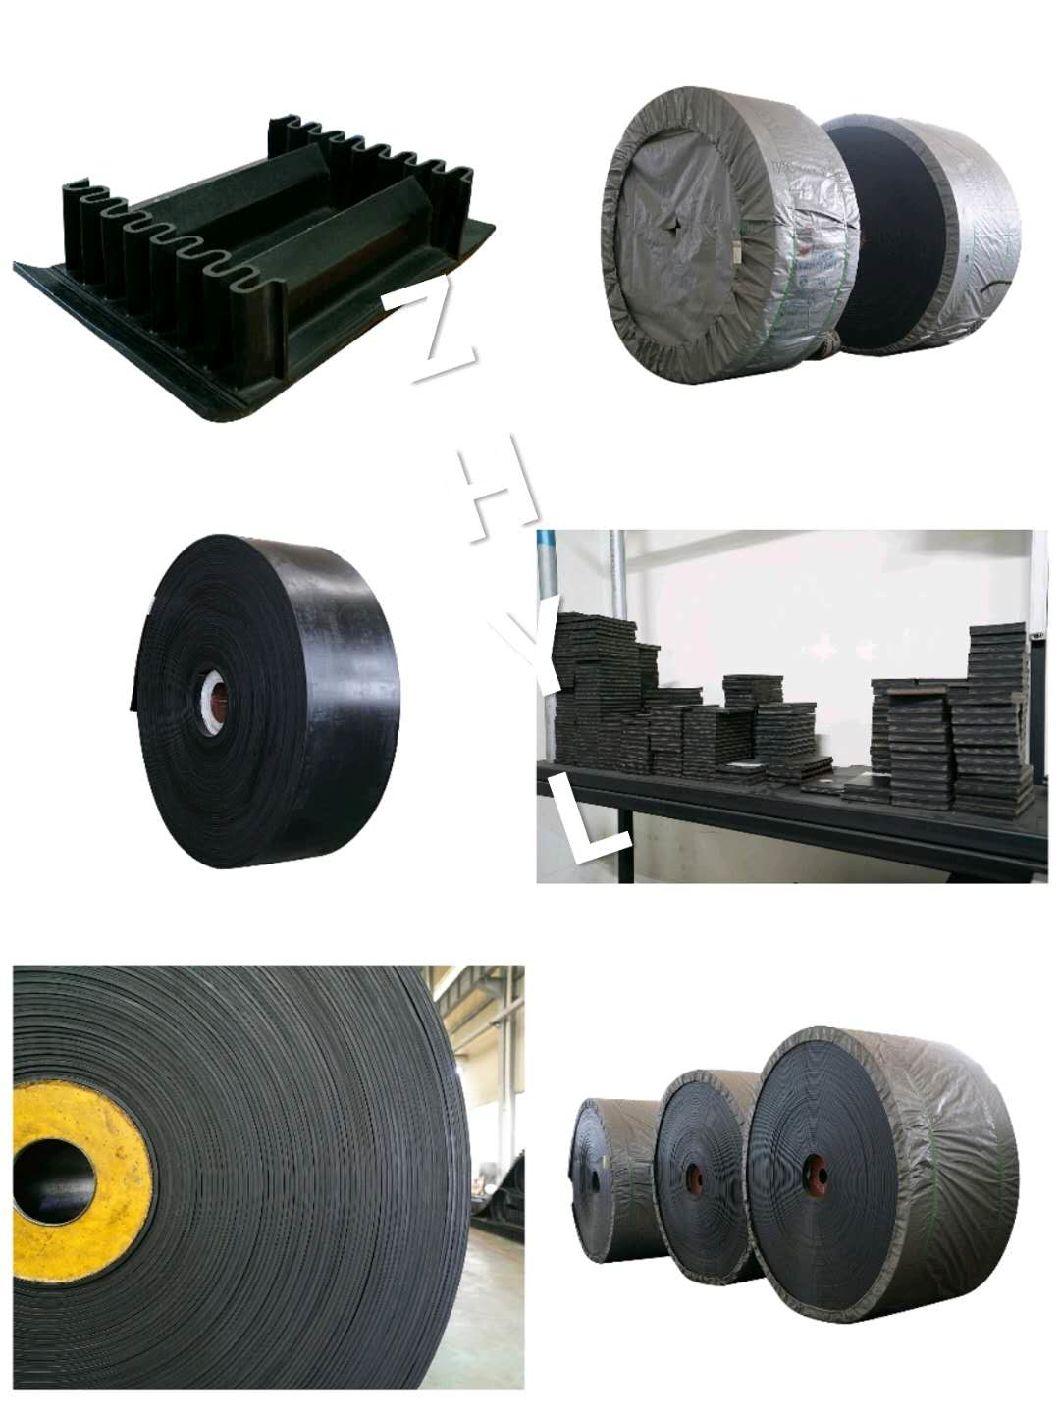 Texile High Tensile Rubber Conveyor Belt Special Carcass for Heavy Industry Mining